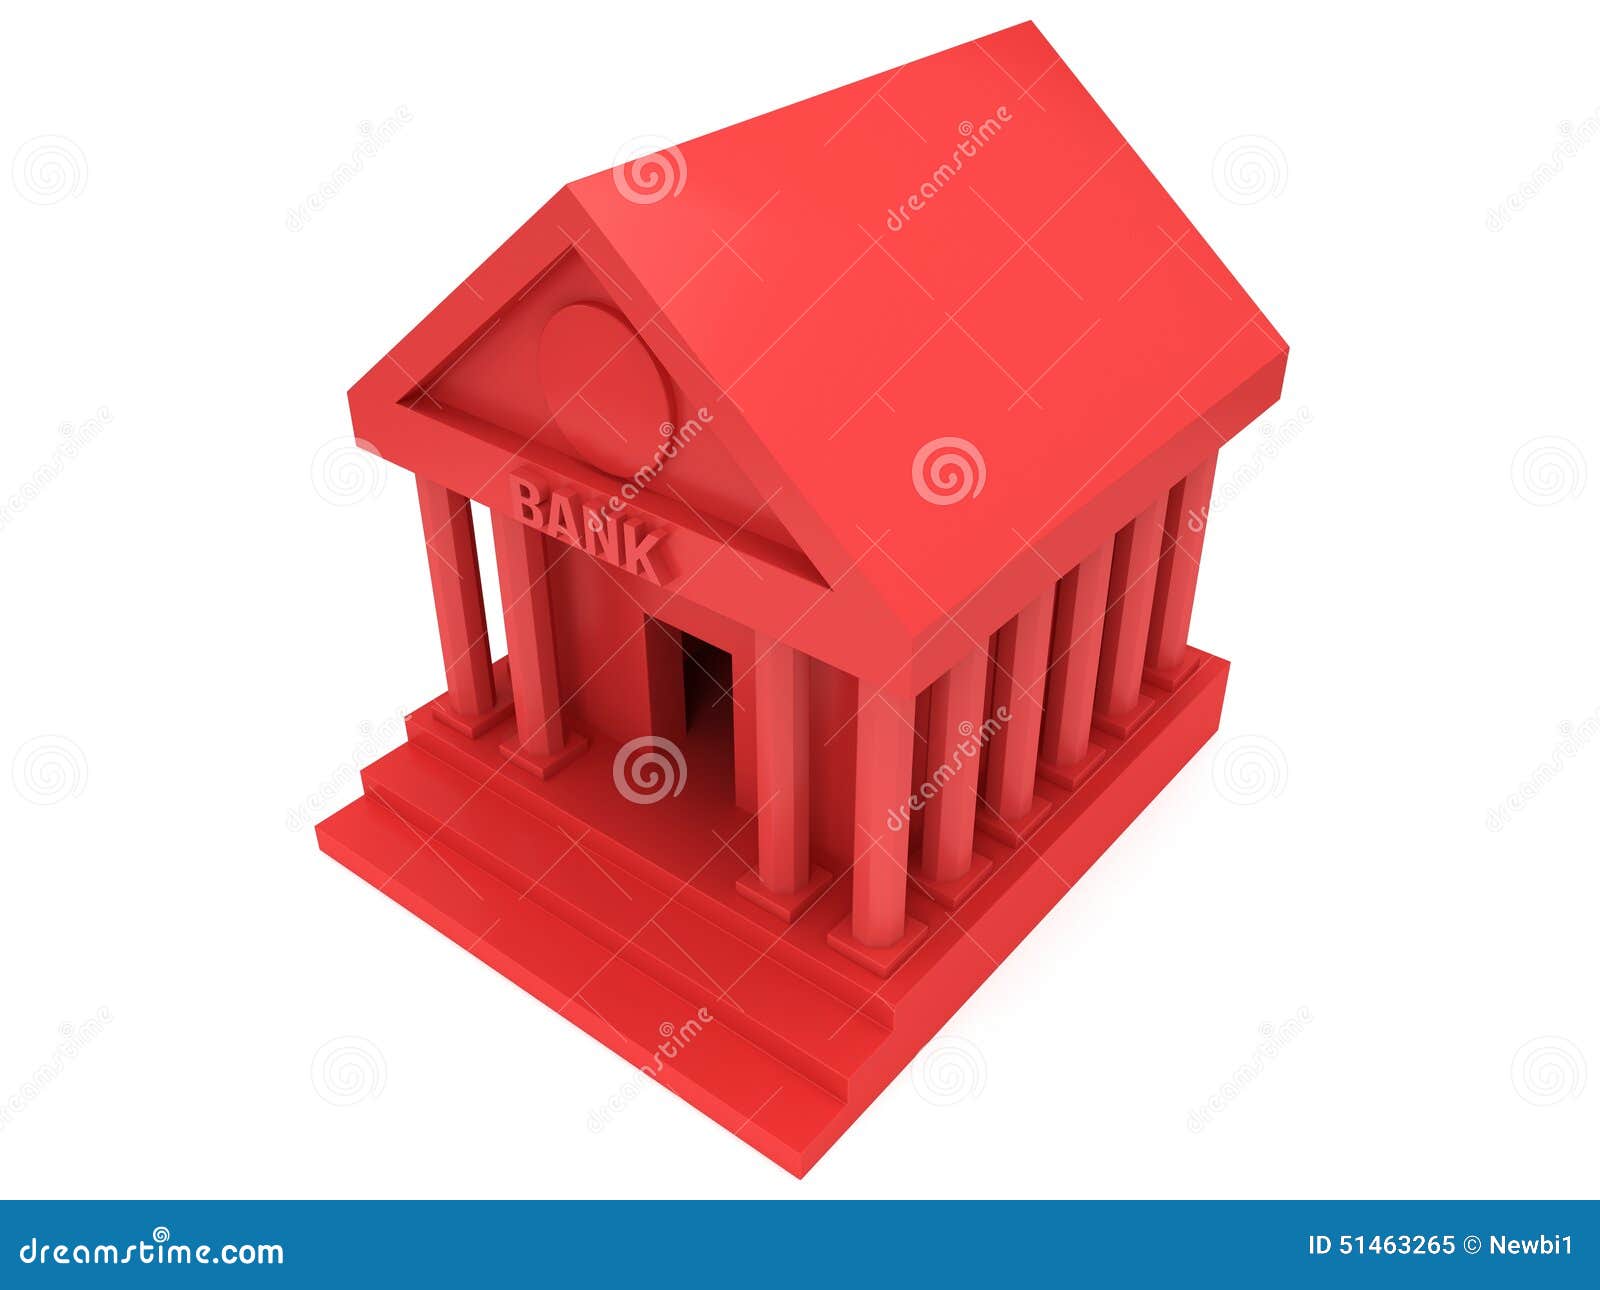 Catena Ydmyge Inhalere Red Bank building 3d icon stock illustration. Illustration of crisis -  51463265